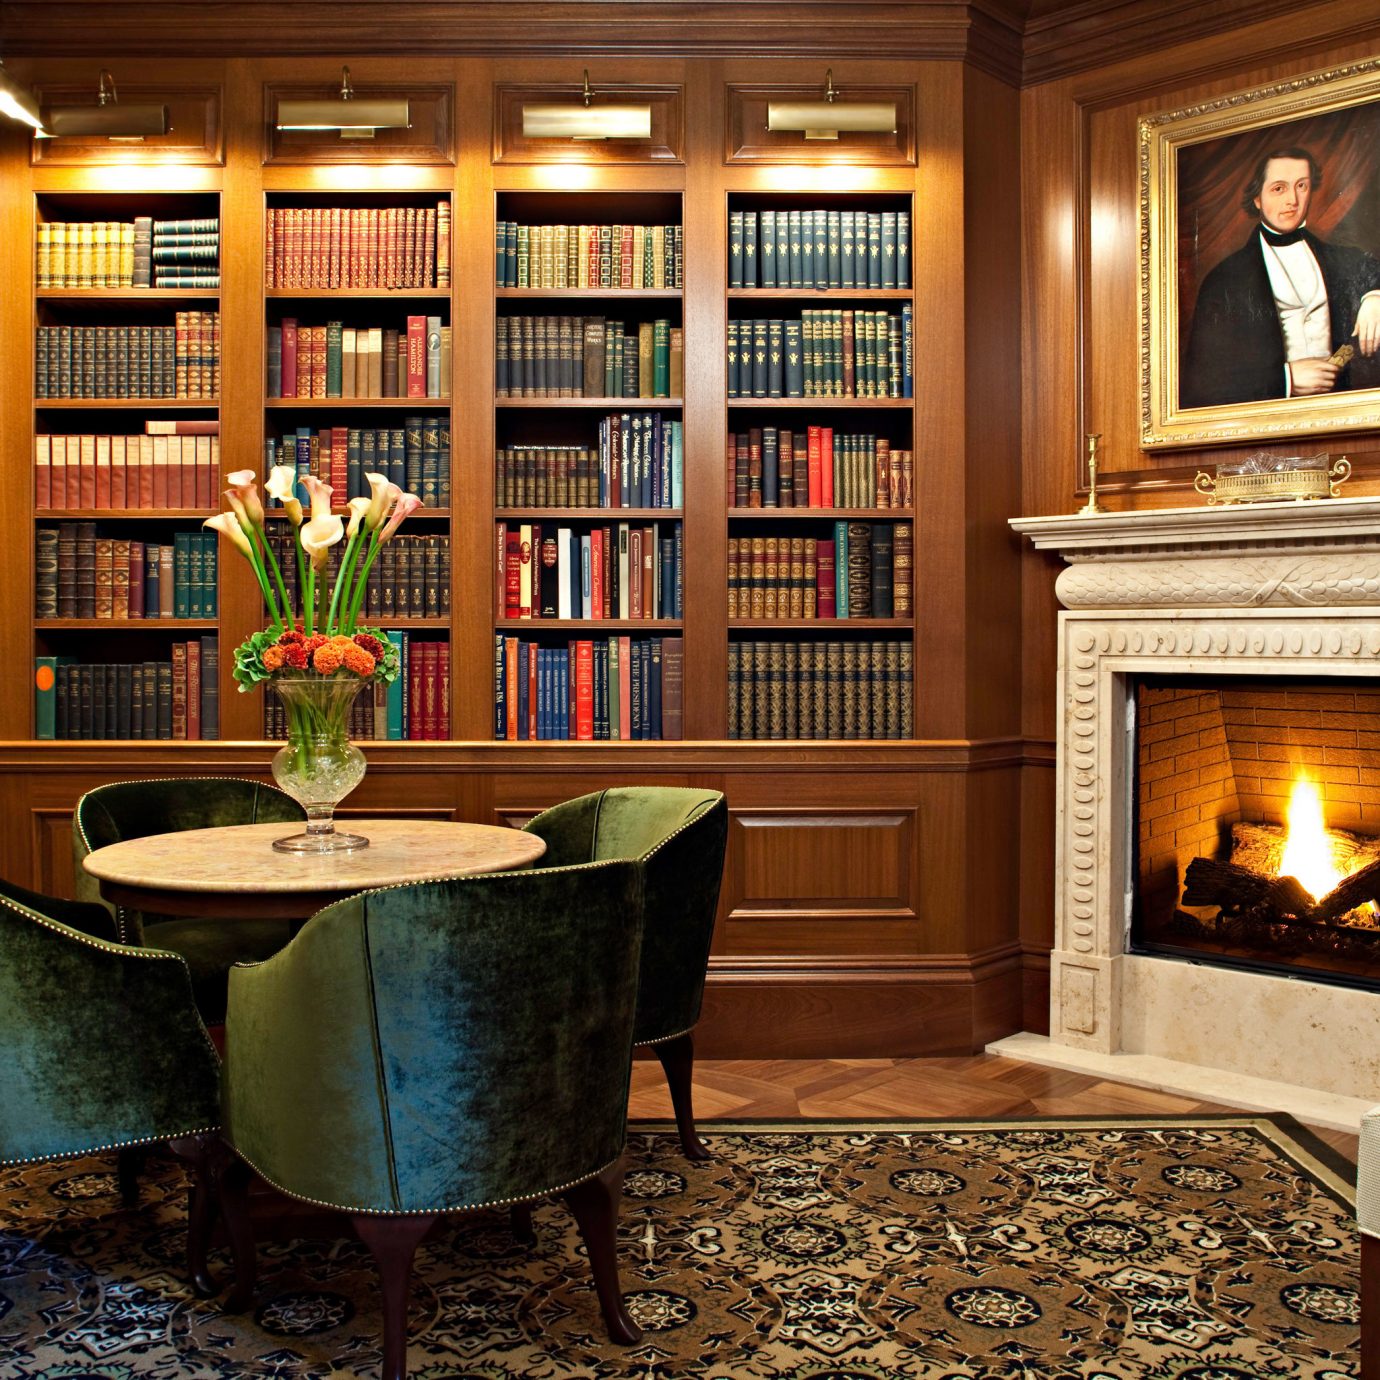 Boutique Hotels Fireplace Hotels Lounge chair home living room cabinetry shelf hardwood mansion